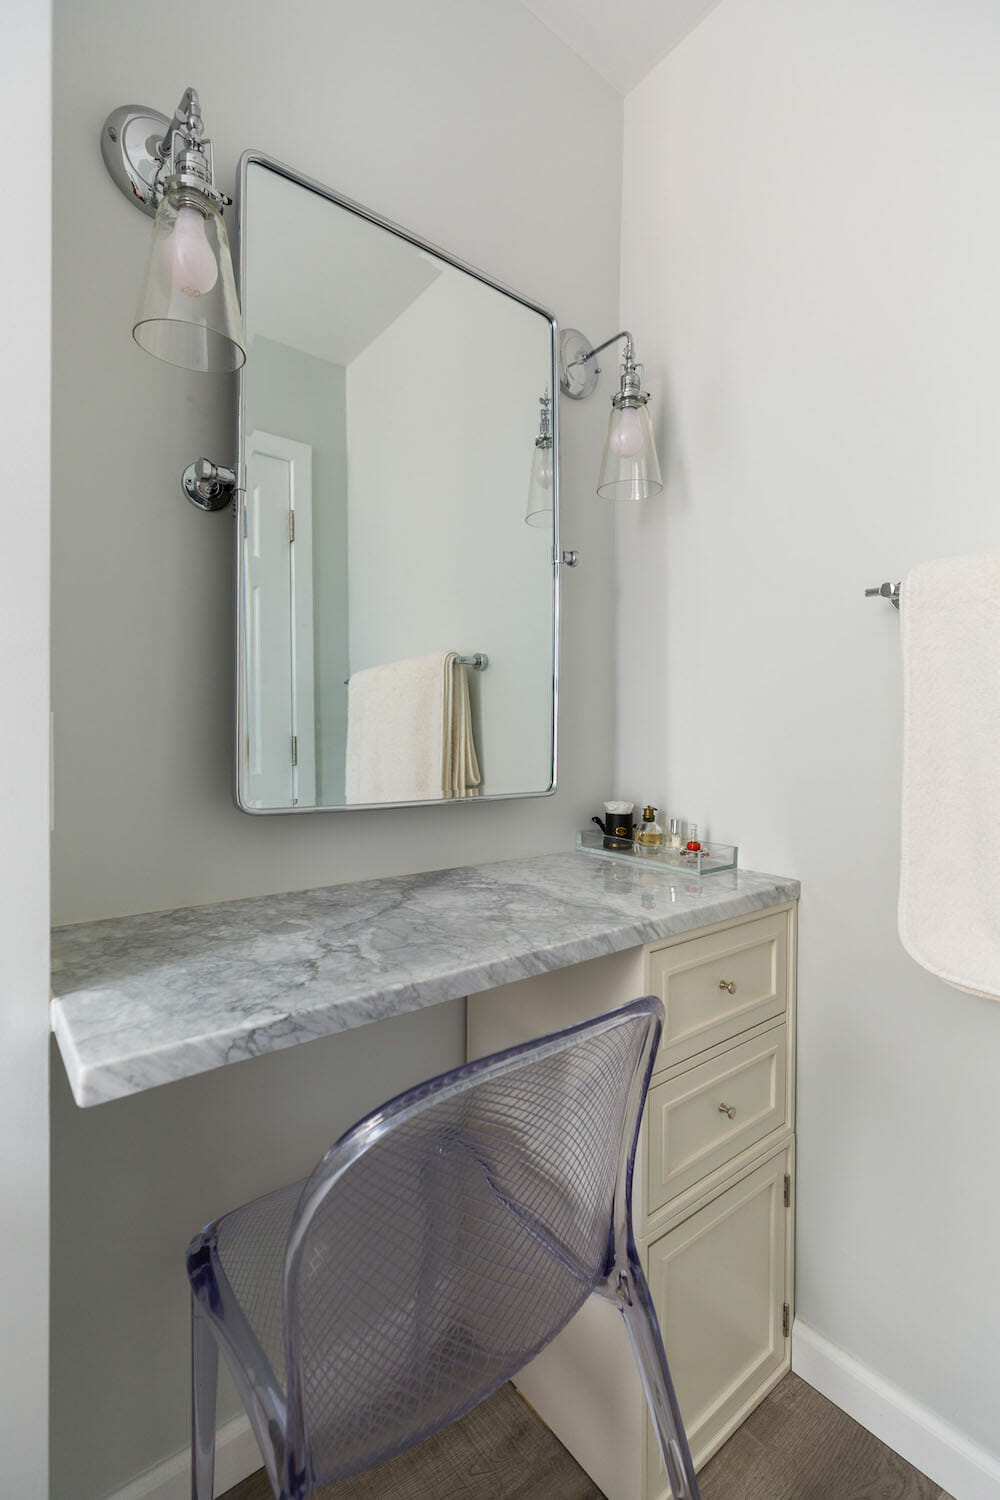 This peaceful home design gives Jessica her own vanity to get ready in the morning